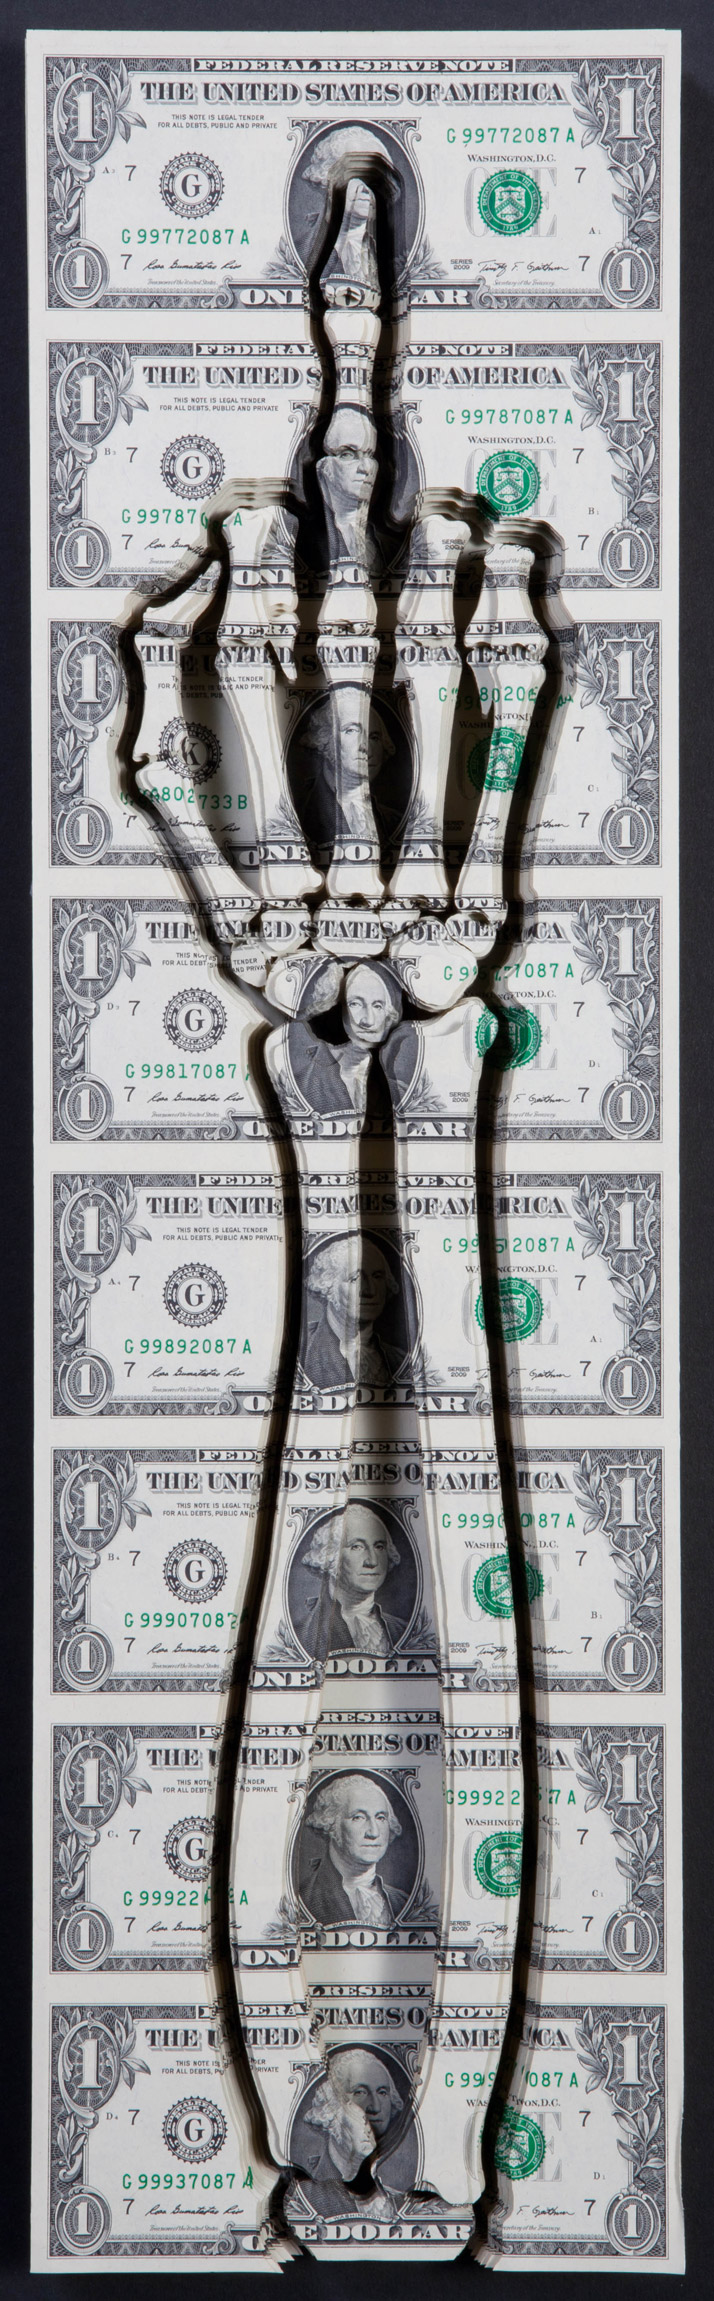 Good  Morning, 2011. By Scott Campbell. Lasered uncut US currency. From the  book 'Forever: The New Tattoo'. Copyright Gestalten 2012.